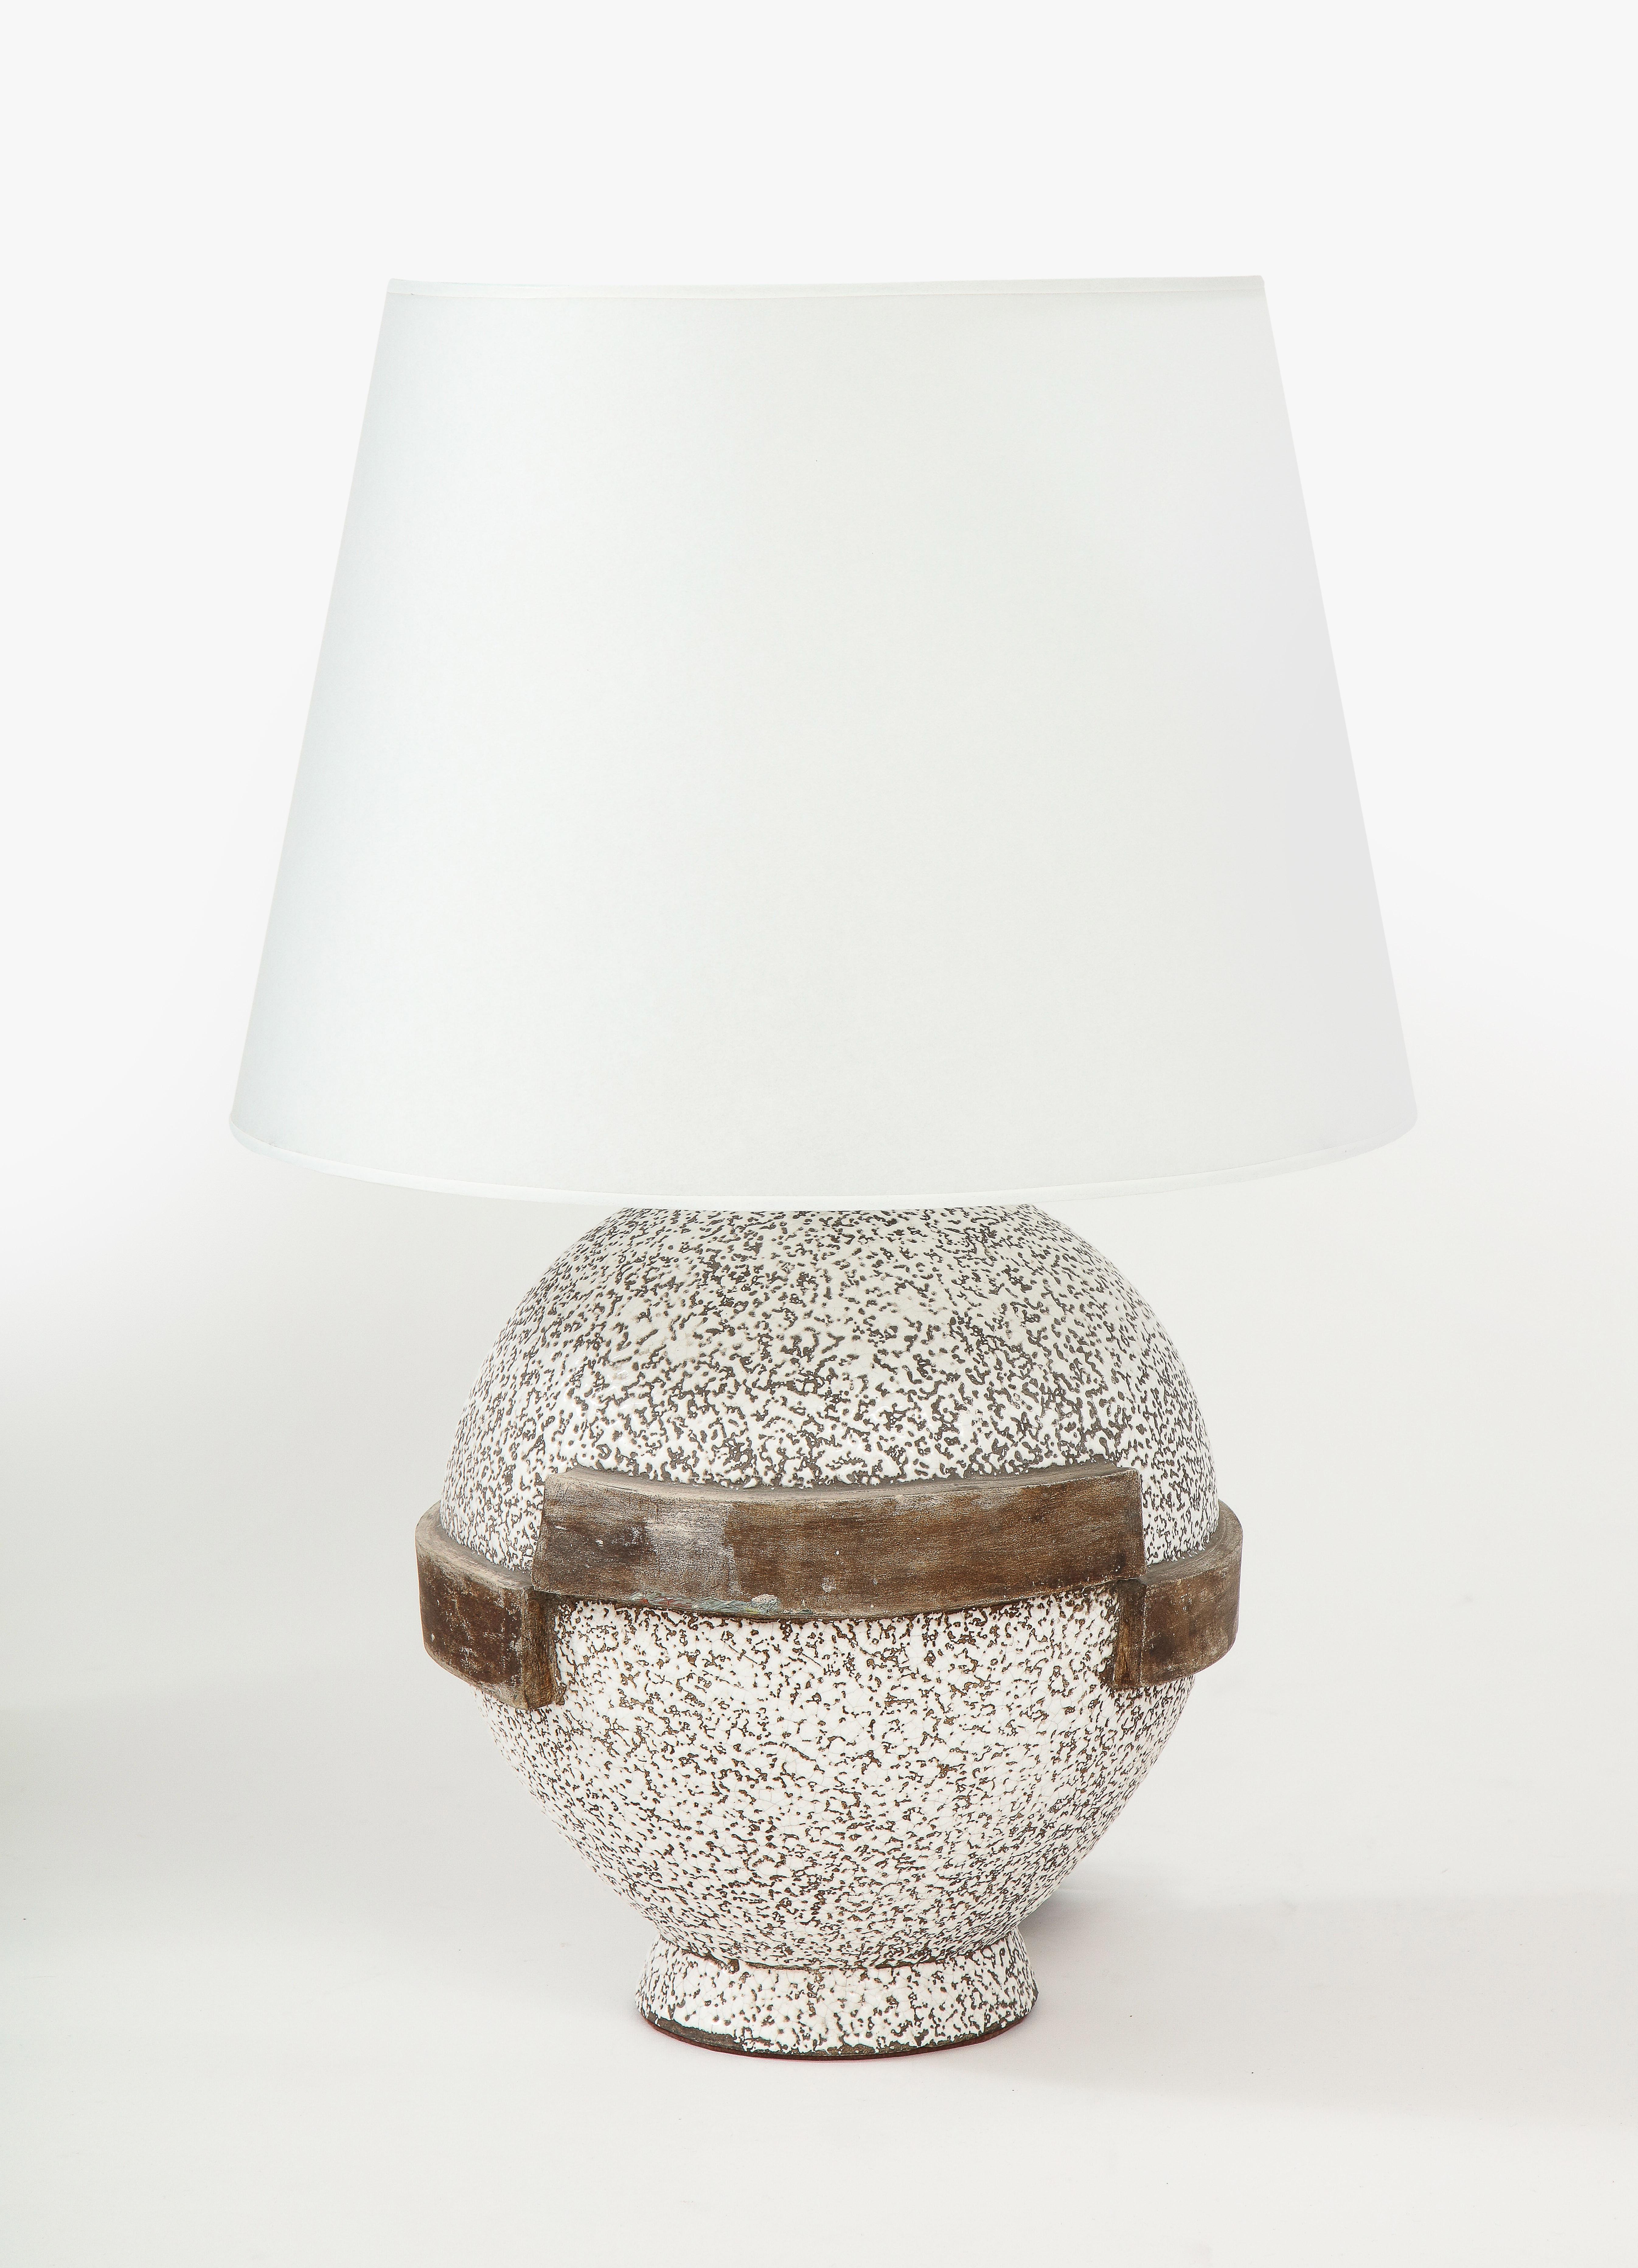 French Large C.A.B. Ceramic Brown/White Lamp, Custom Parchment Shade, France, c. 1935